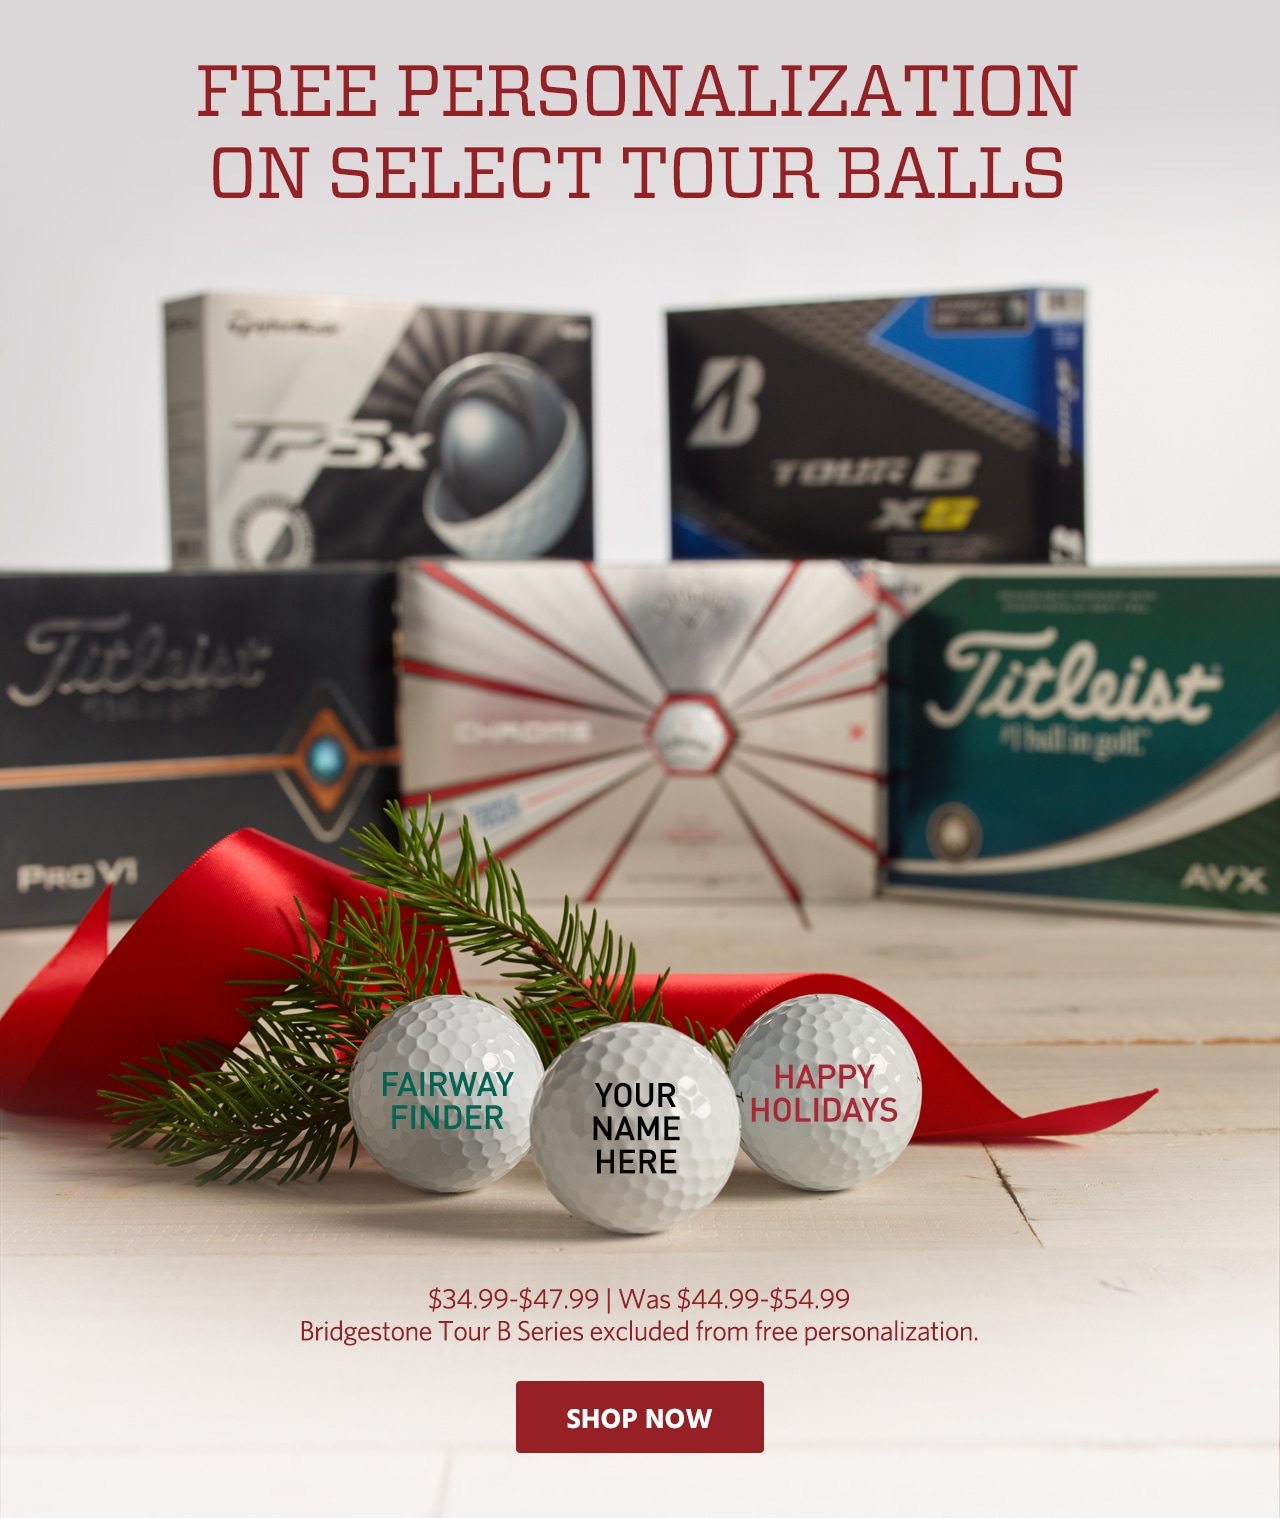 Free personalization on select tour balls. $34.99 to $47.99. Was $44.99 to $54.99. Bridgestone Tour B Series excluded from free personalization. Shop Now.